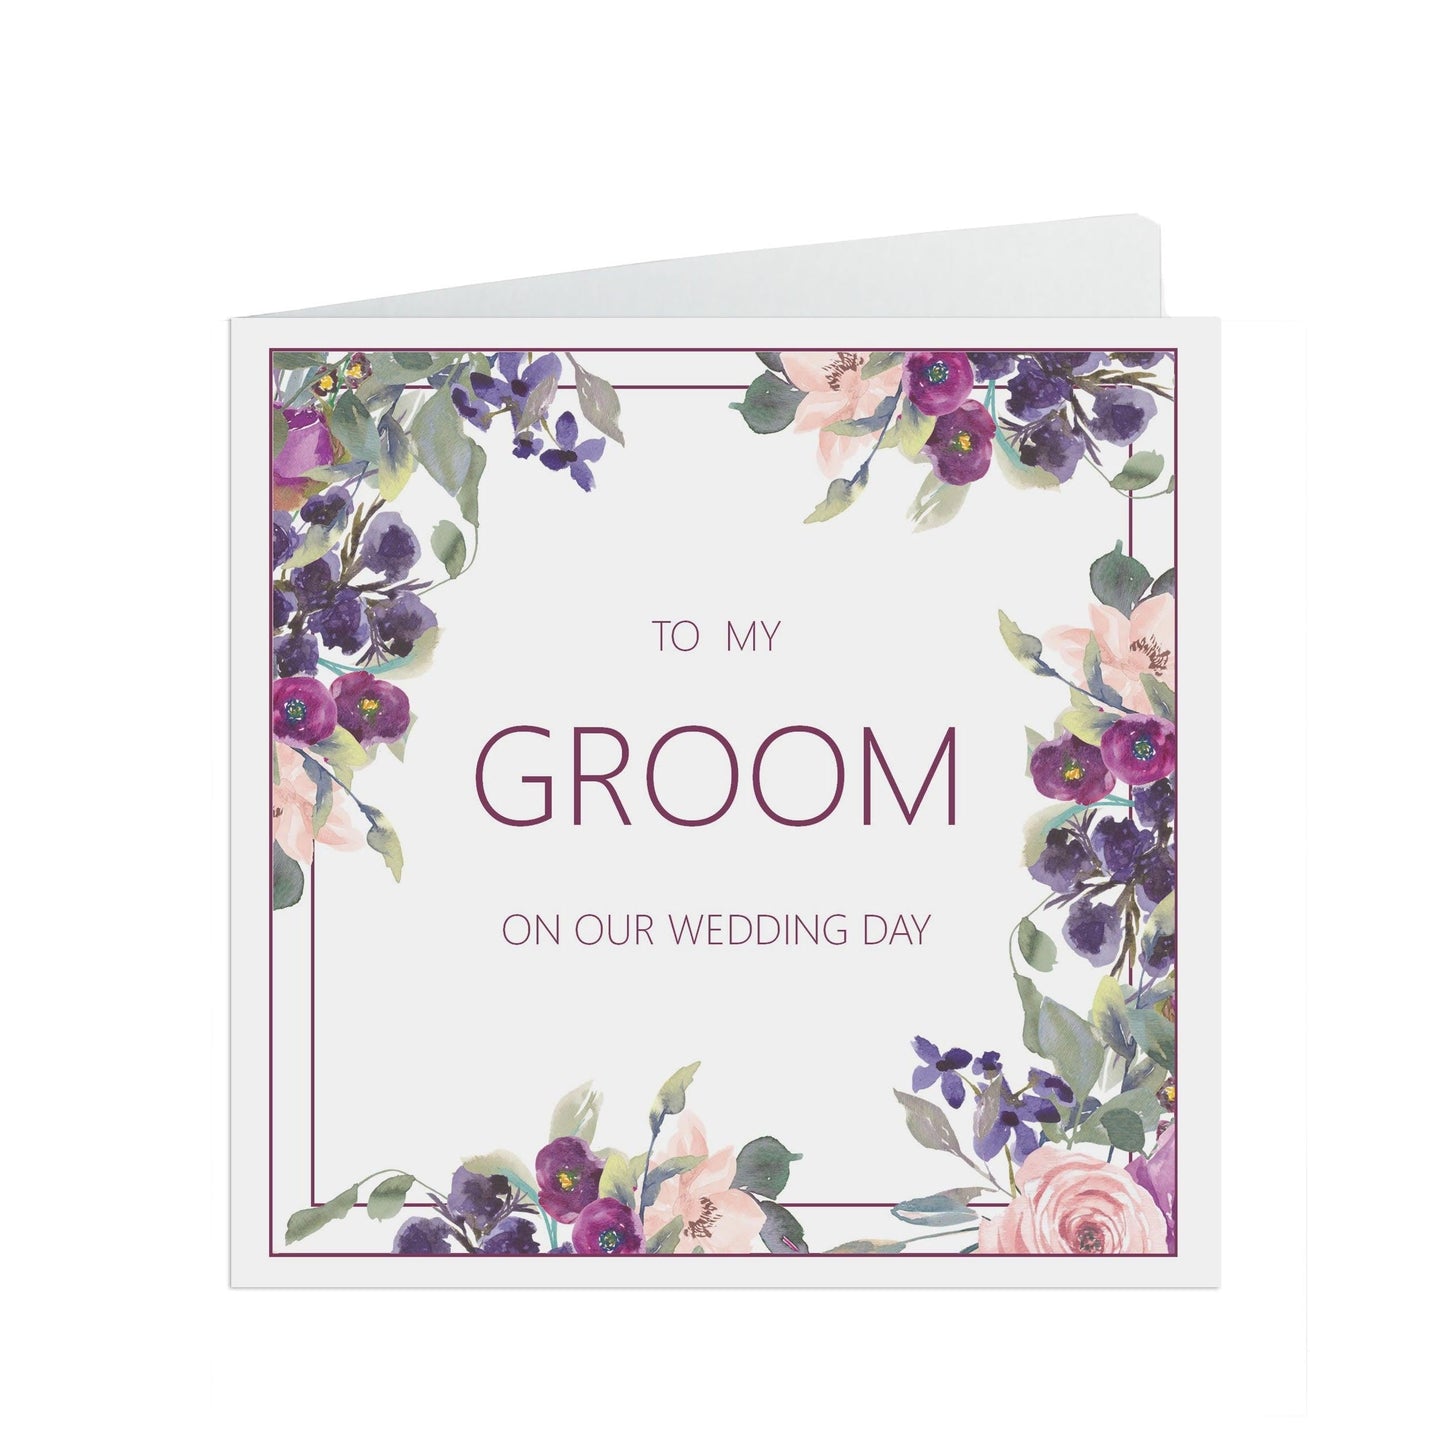  Groom Wedding Day Card, Purple Floral 6x6 Inches In Size With A Kraft Envelope by PMPRINTED 